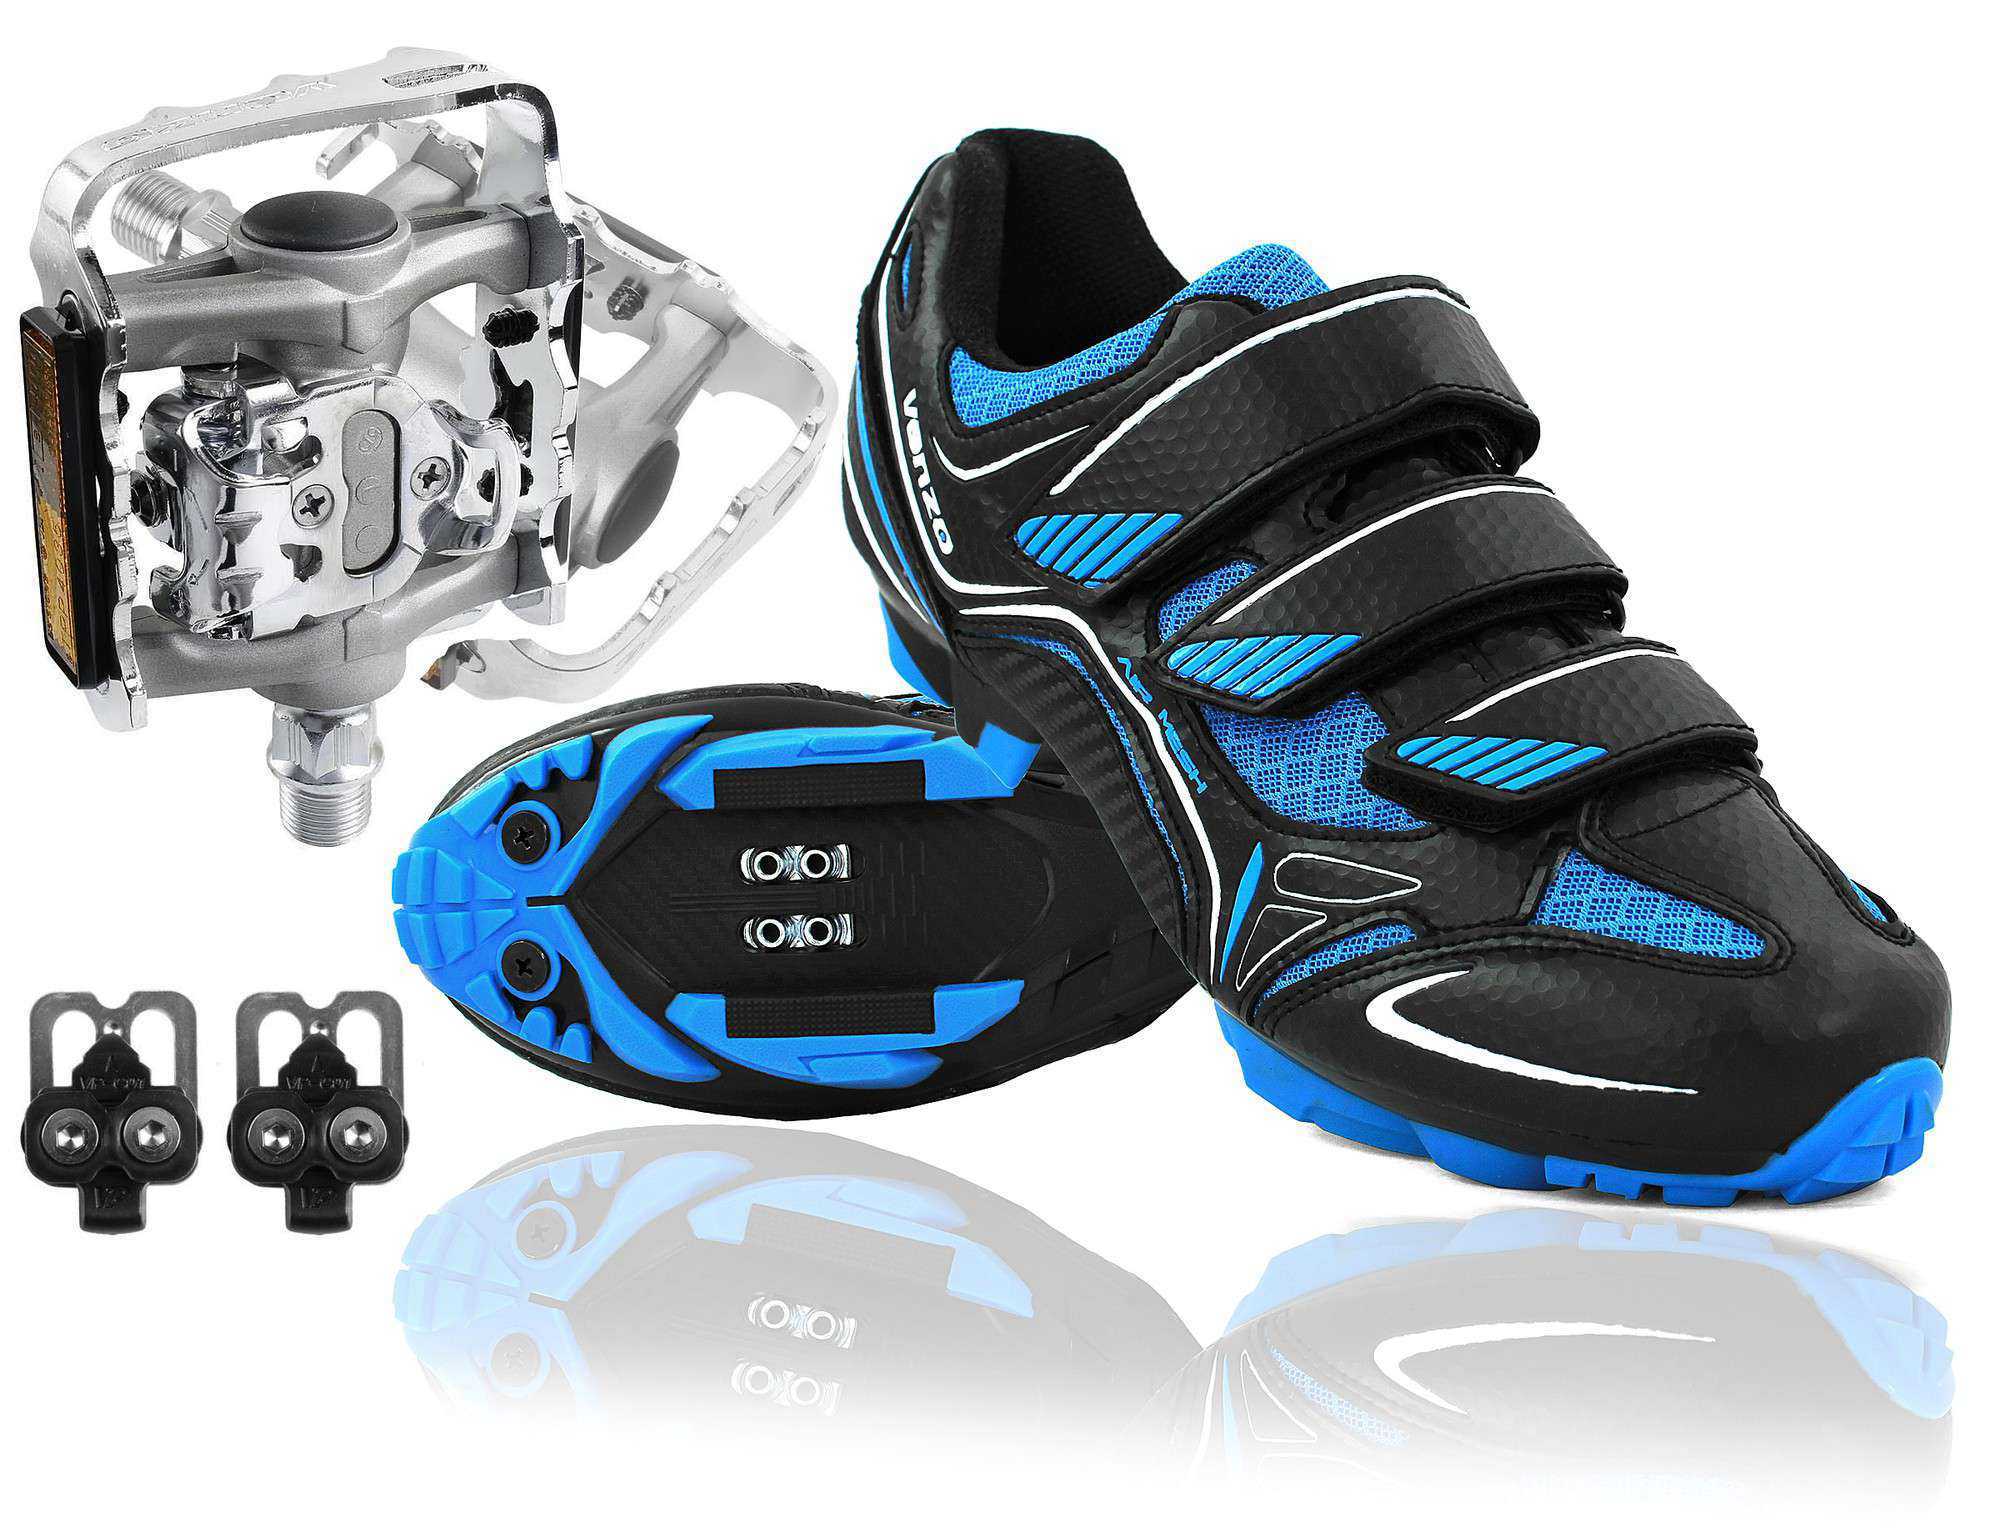 shoes for shimano spd pedals